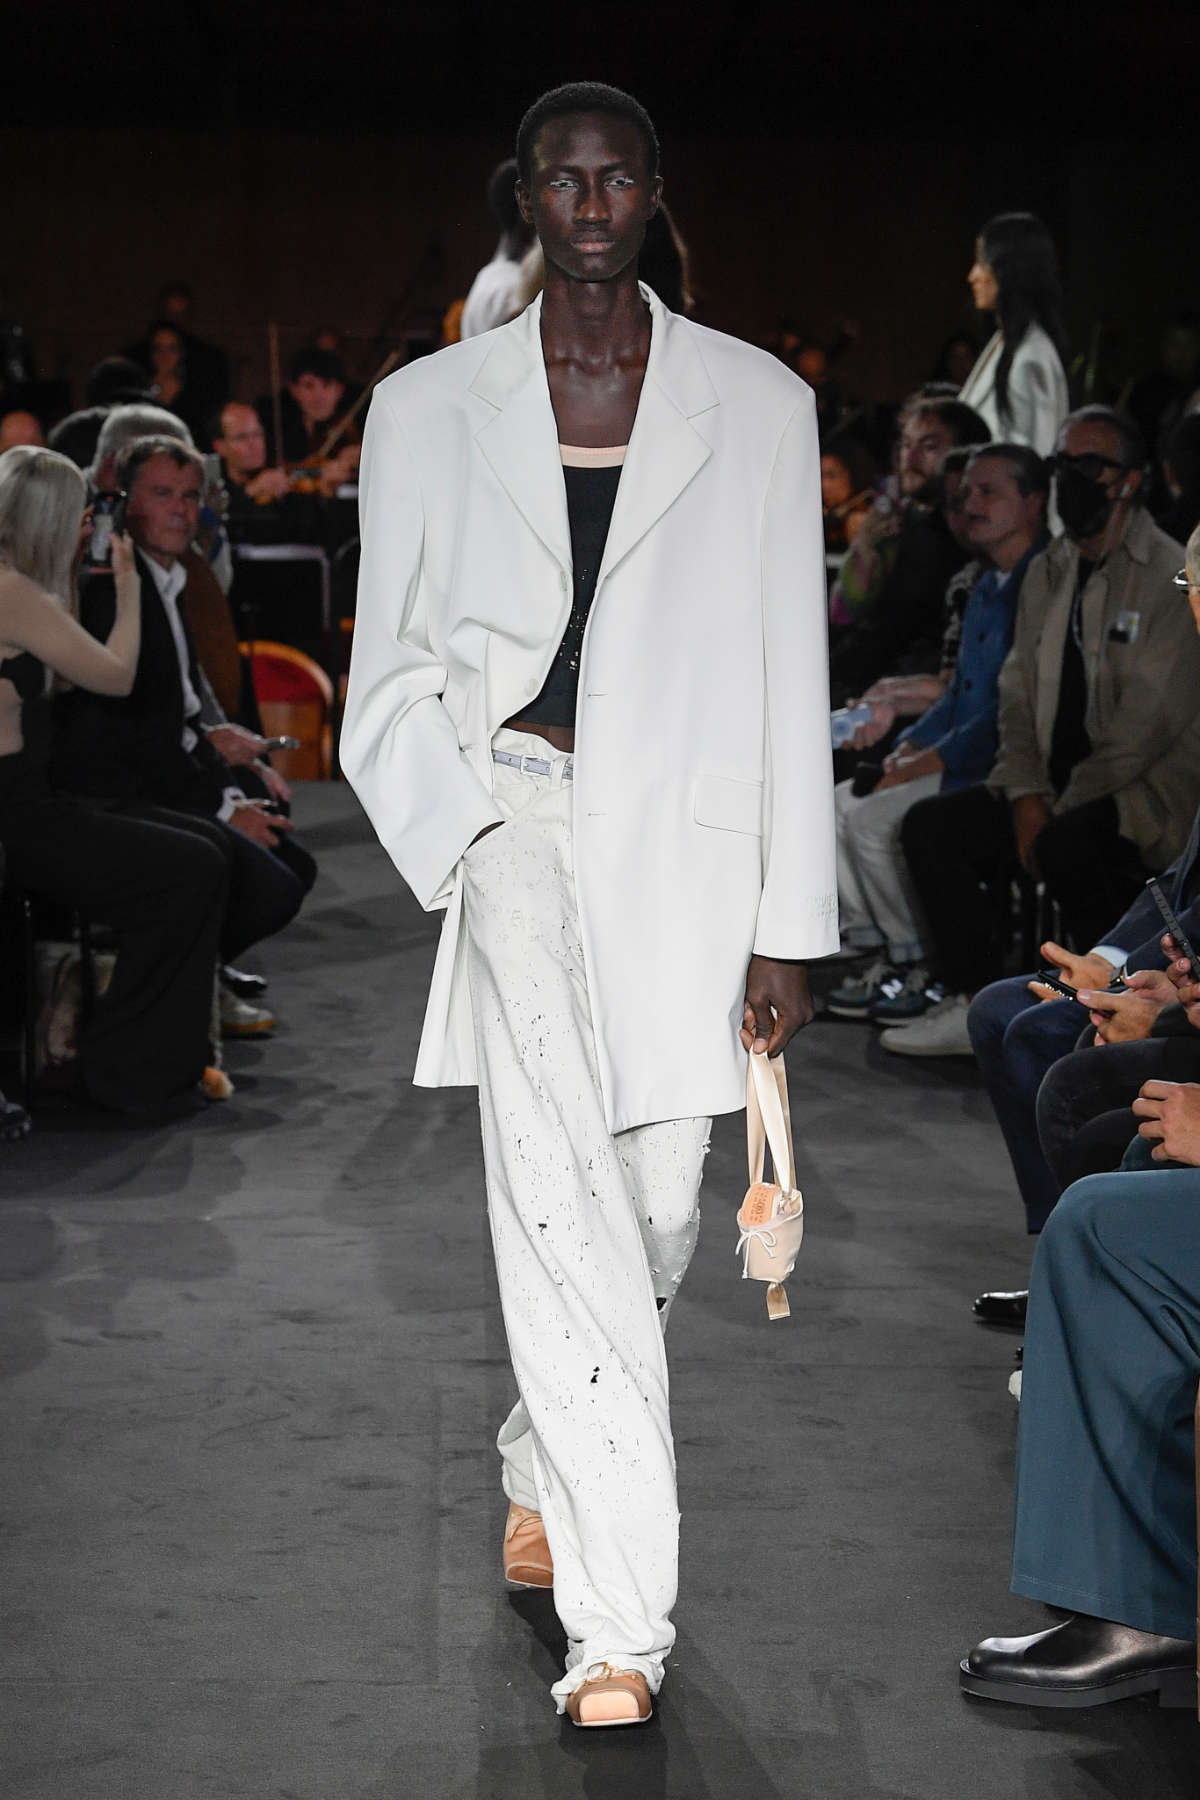 MM6 Maison Margiela Presents Its New Spring-Summer 2023 Collection